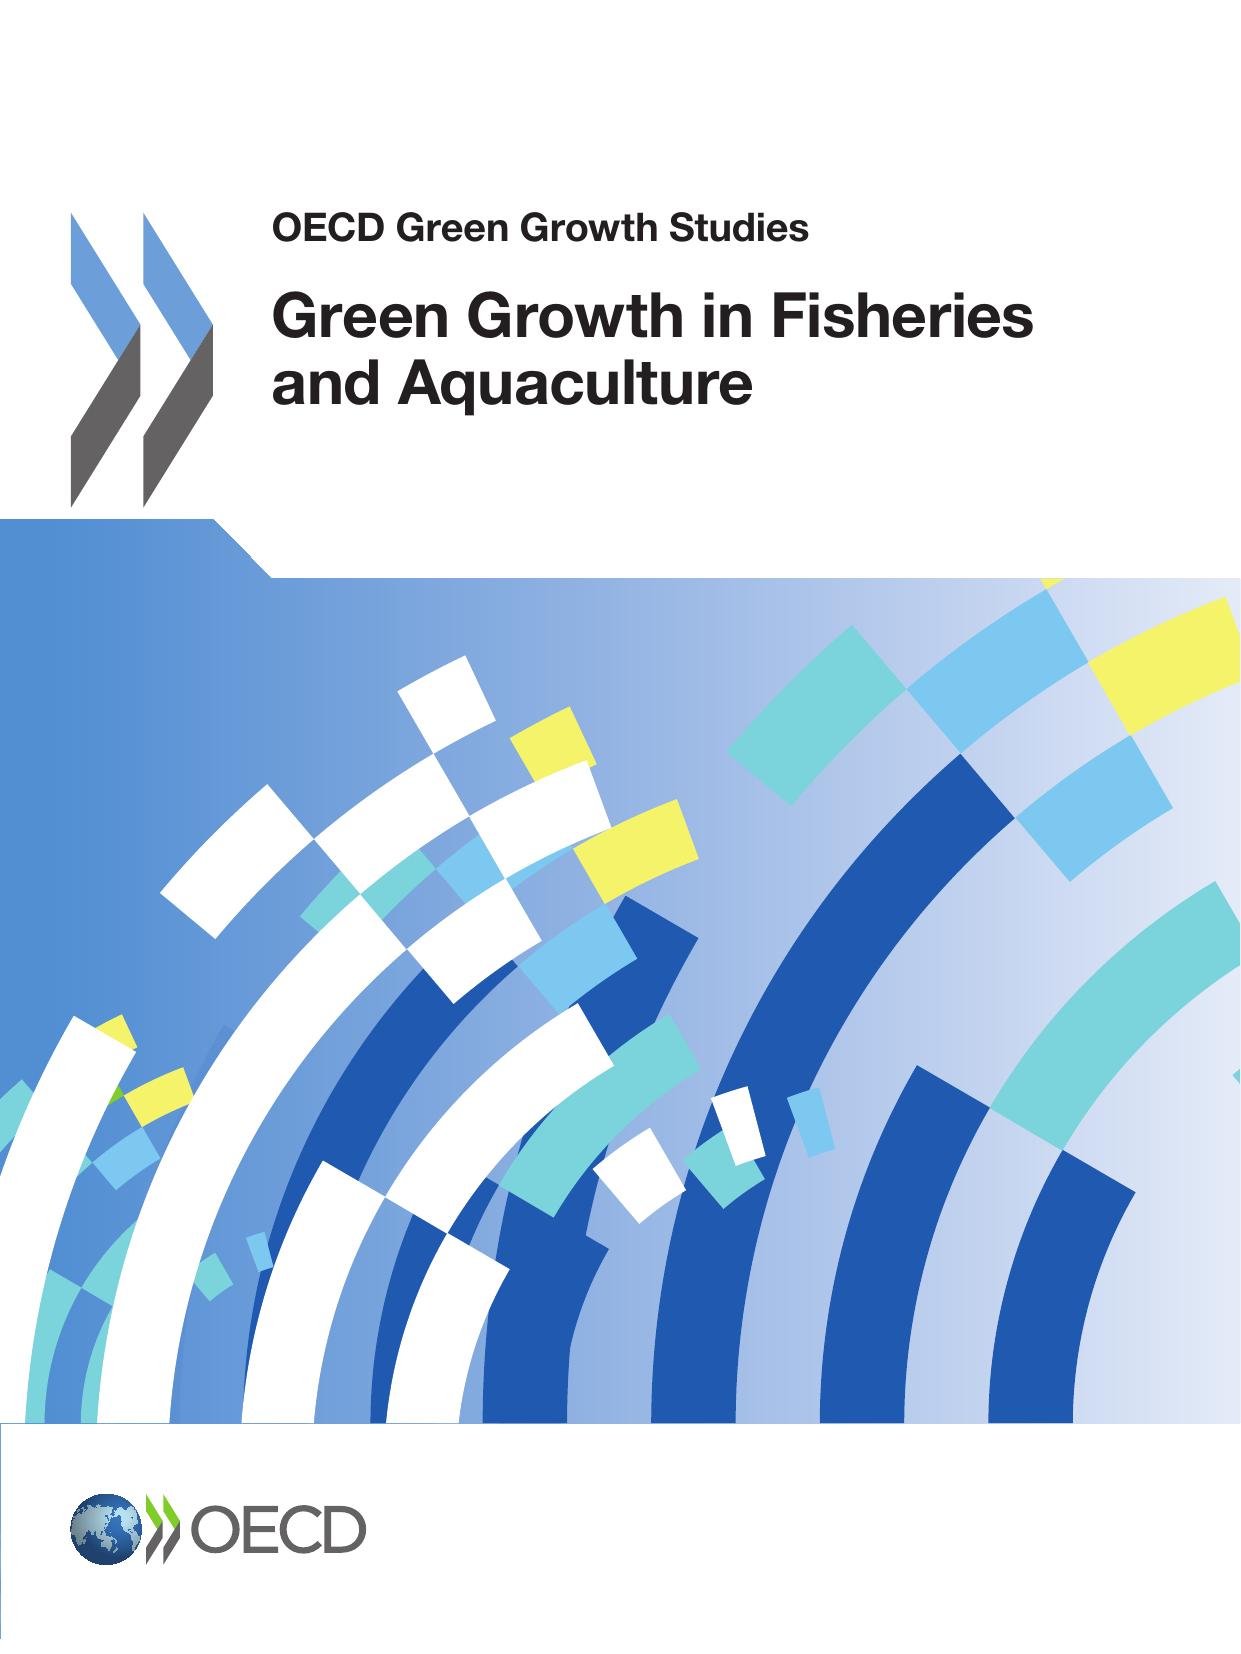 Green Growth in Fisheries and Aquaculture